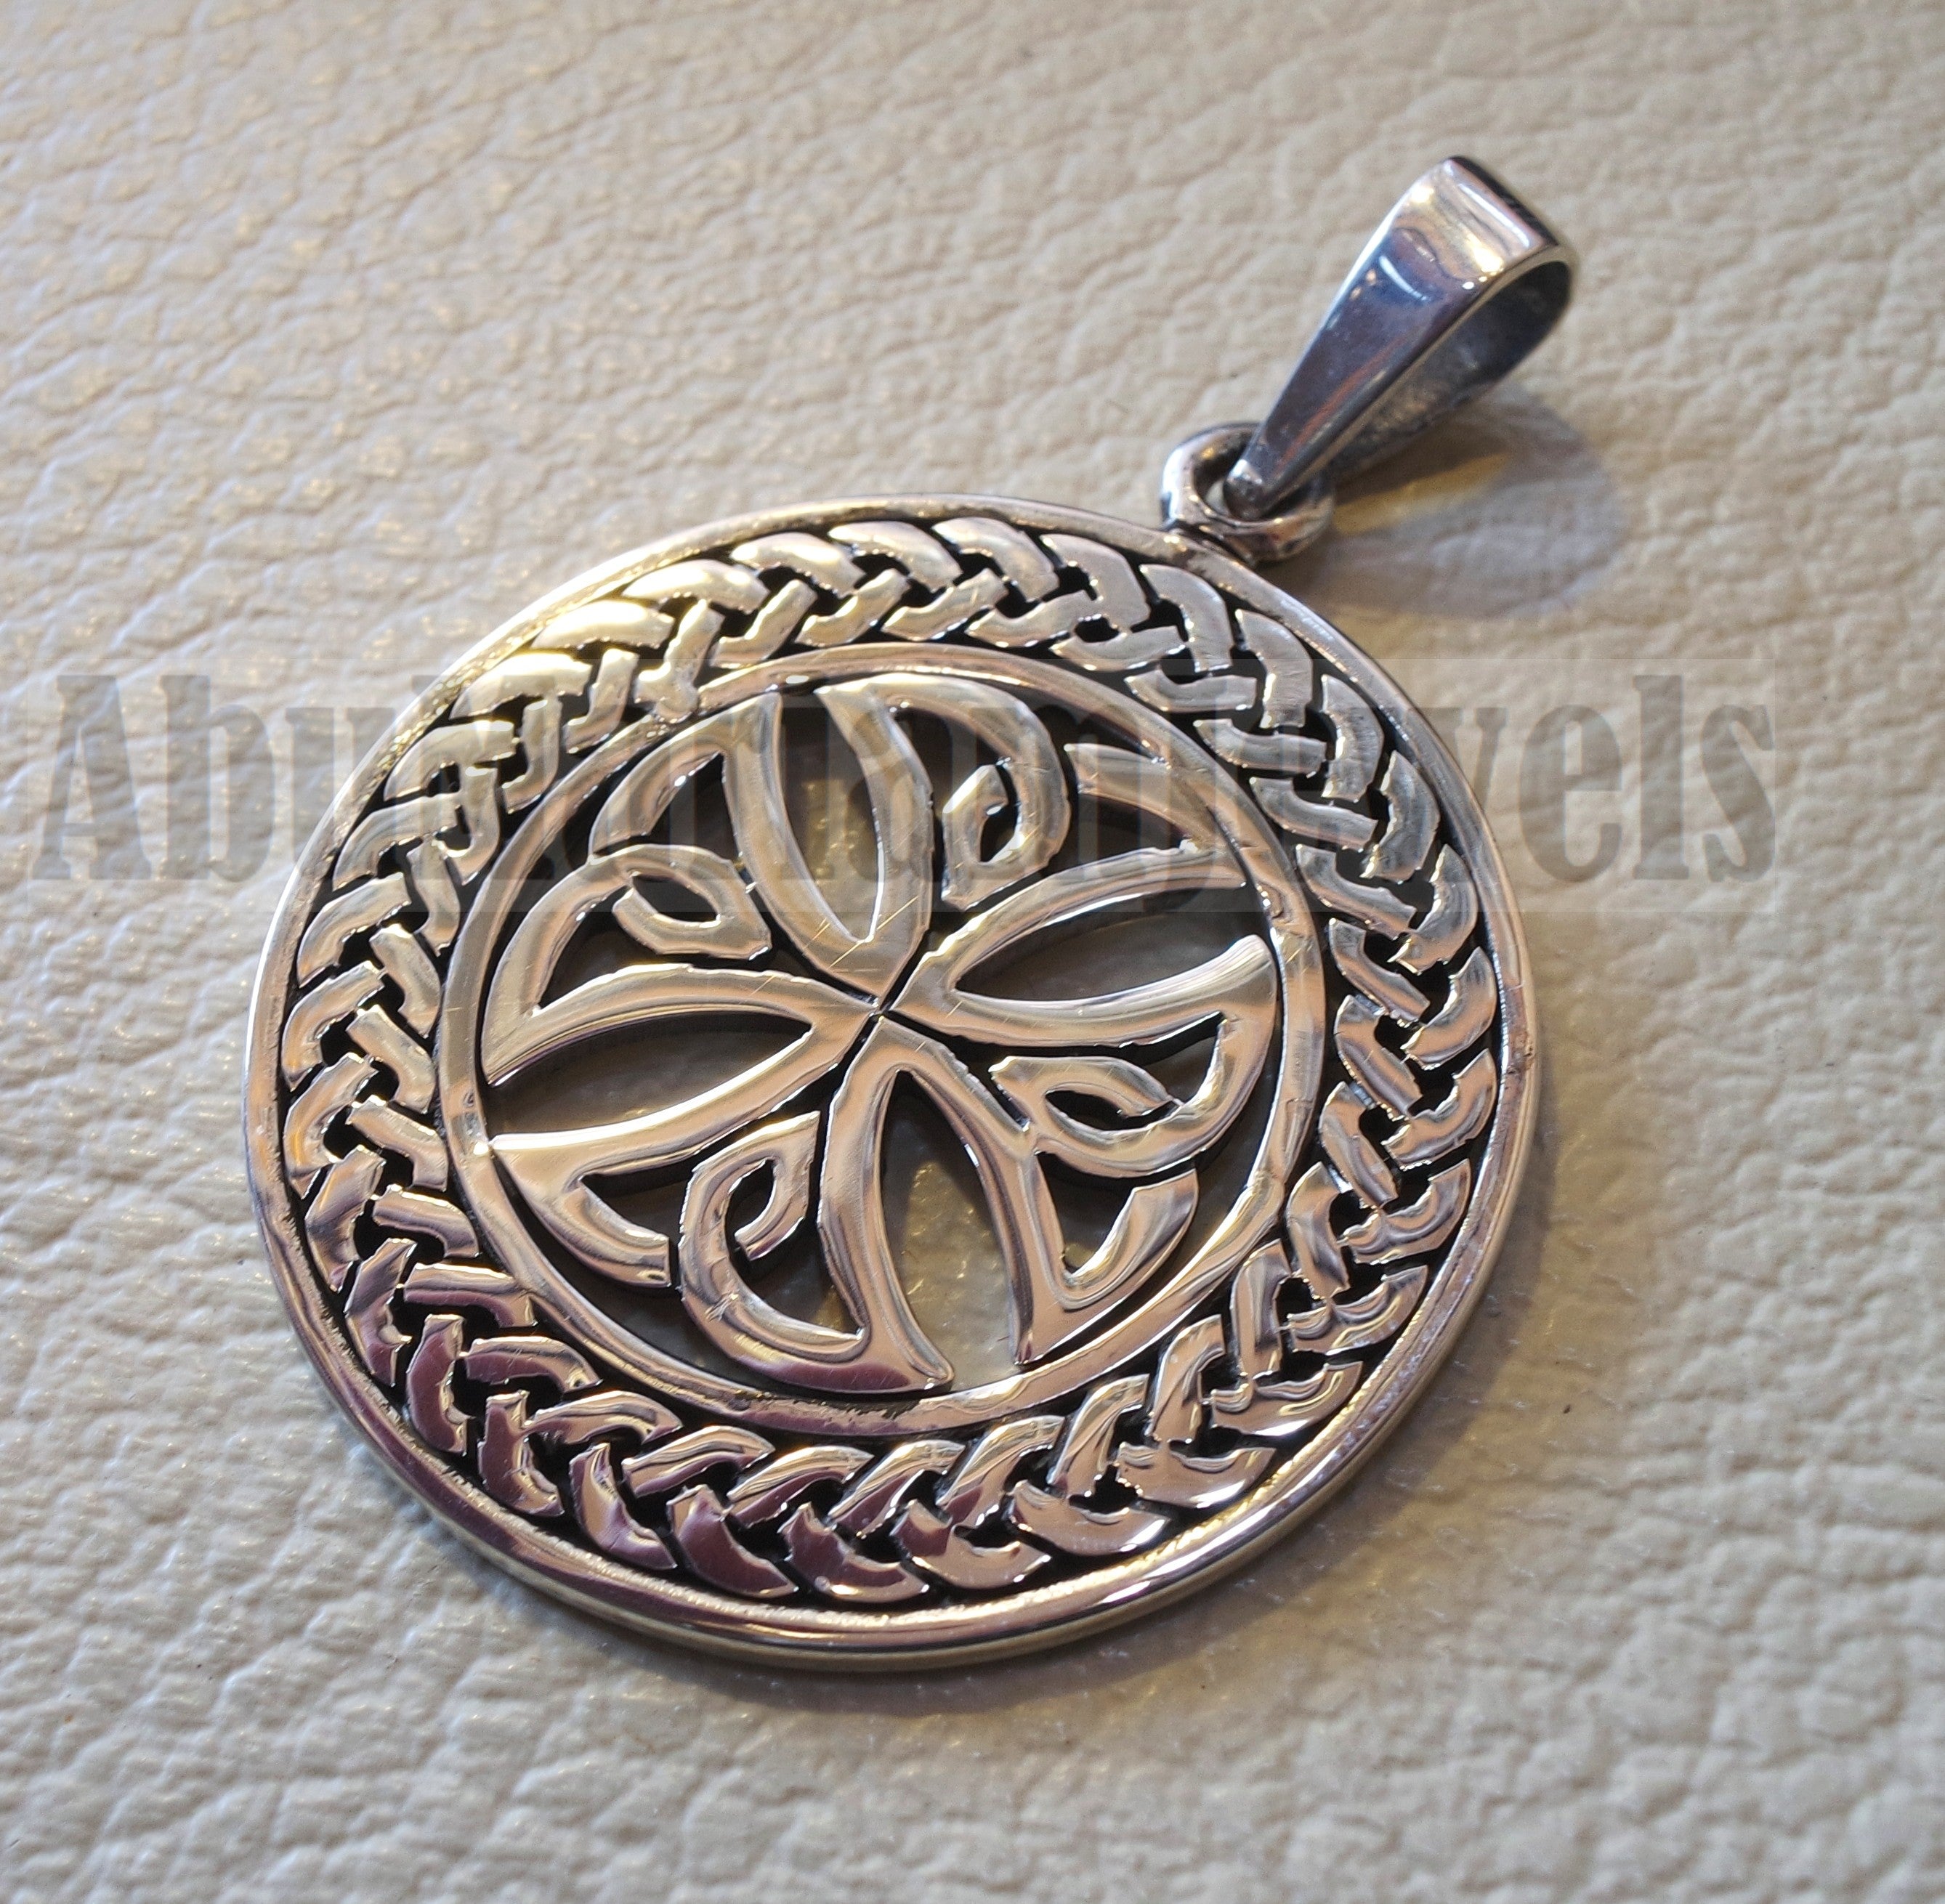 Celtic round cross pendant sterling silver 925 jewelry christianity vintage handmade heavy express shipping Christ religion